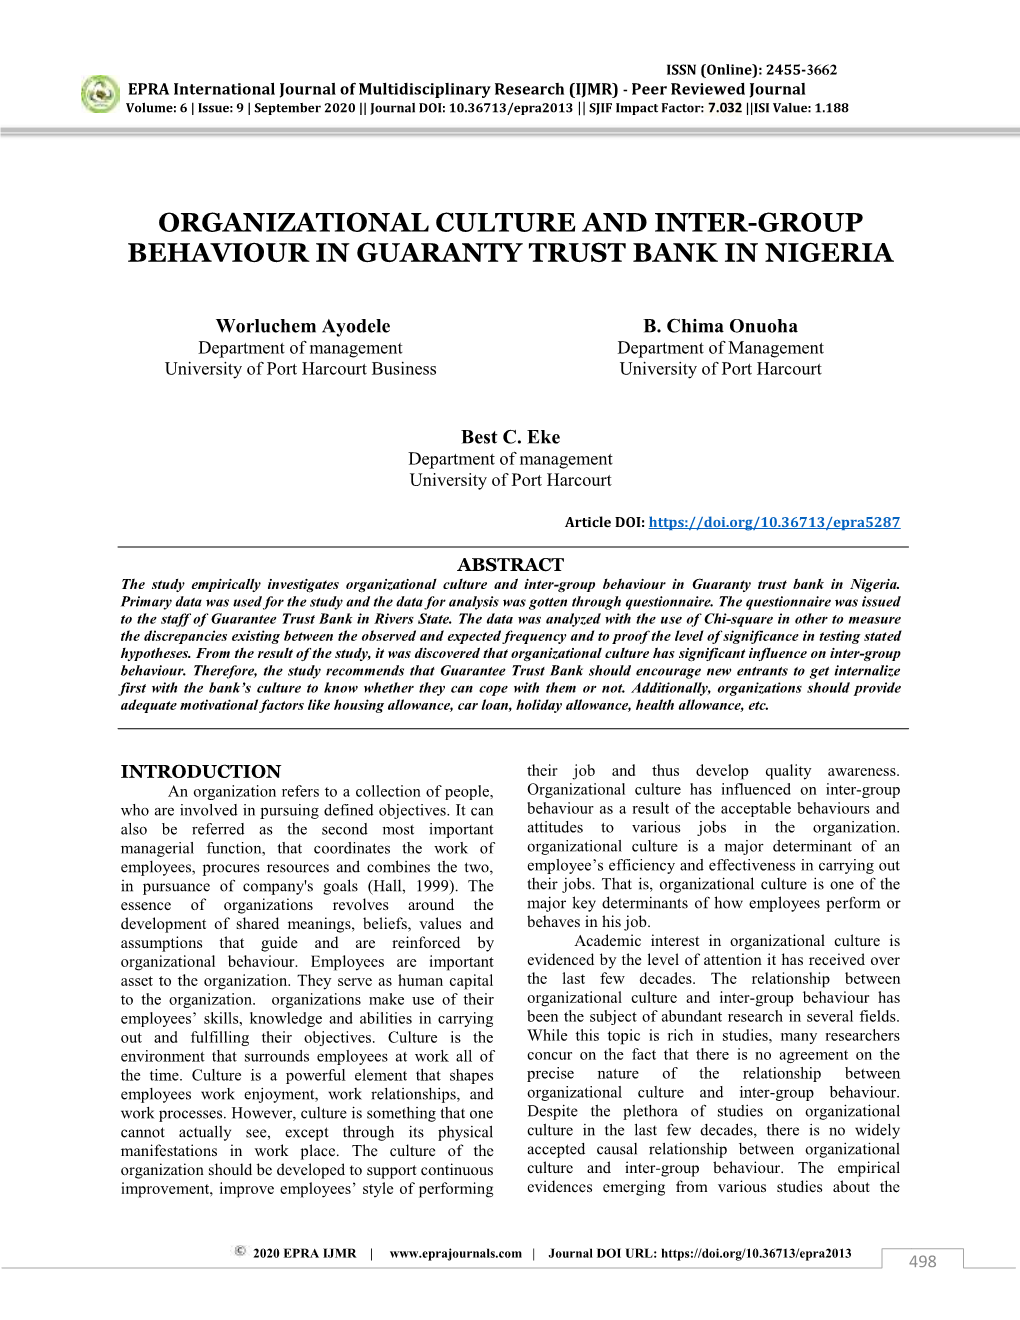 Organizational Culture and Inter-Group Behaviour in Guaranty Trust Bank in Nigeria